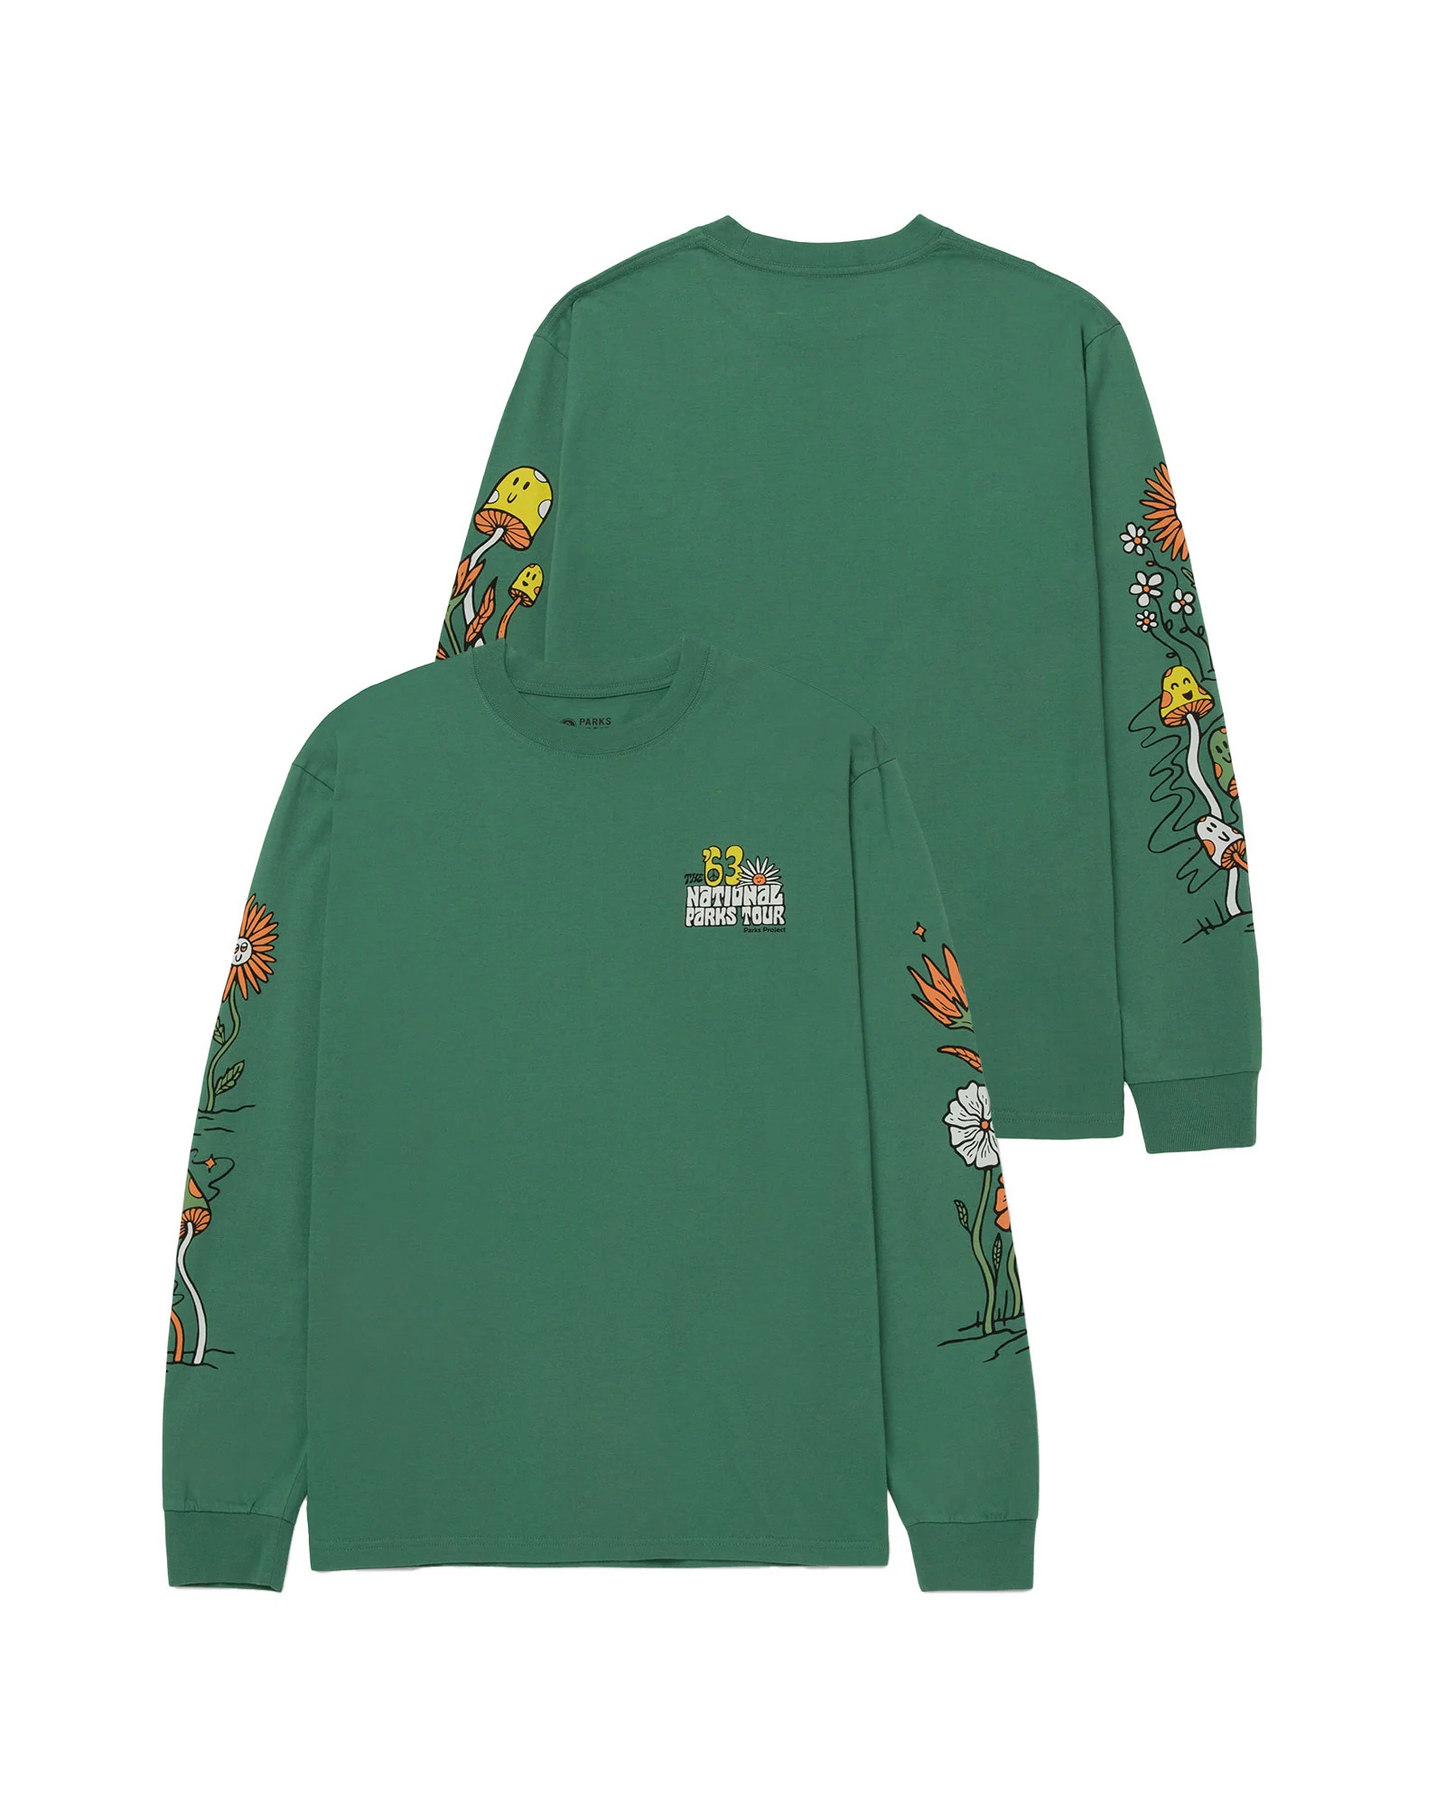 Parks Project '63 National Parks Long Sleeve Tee